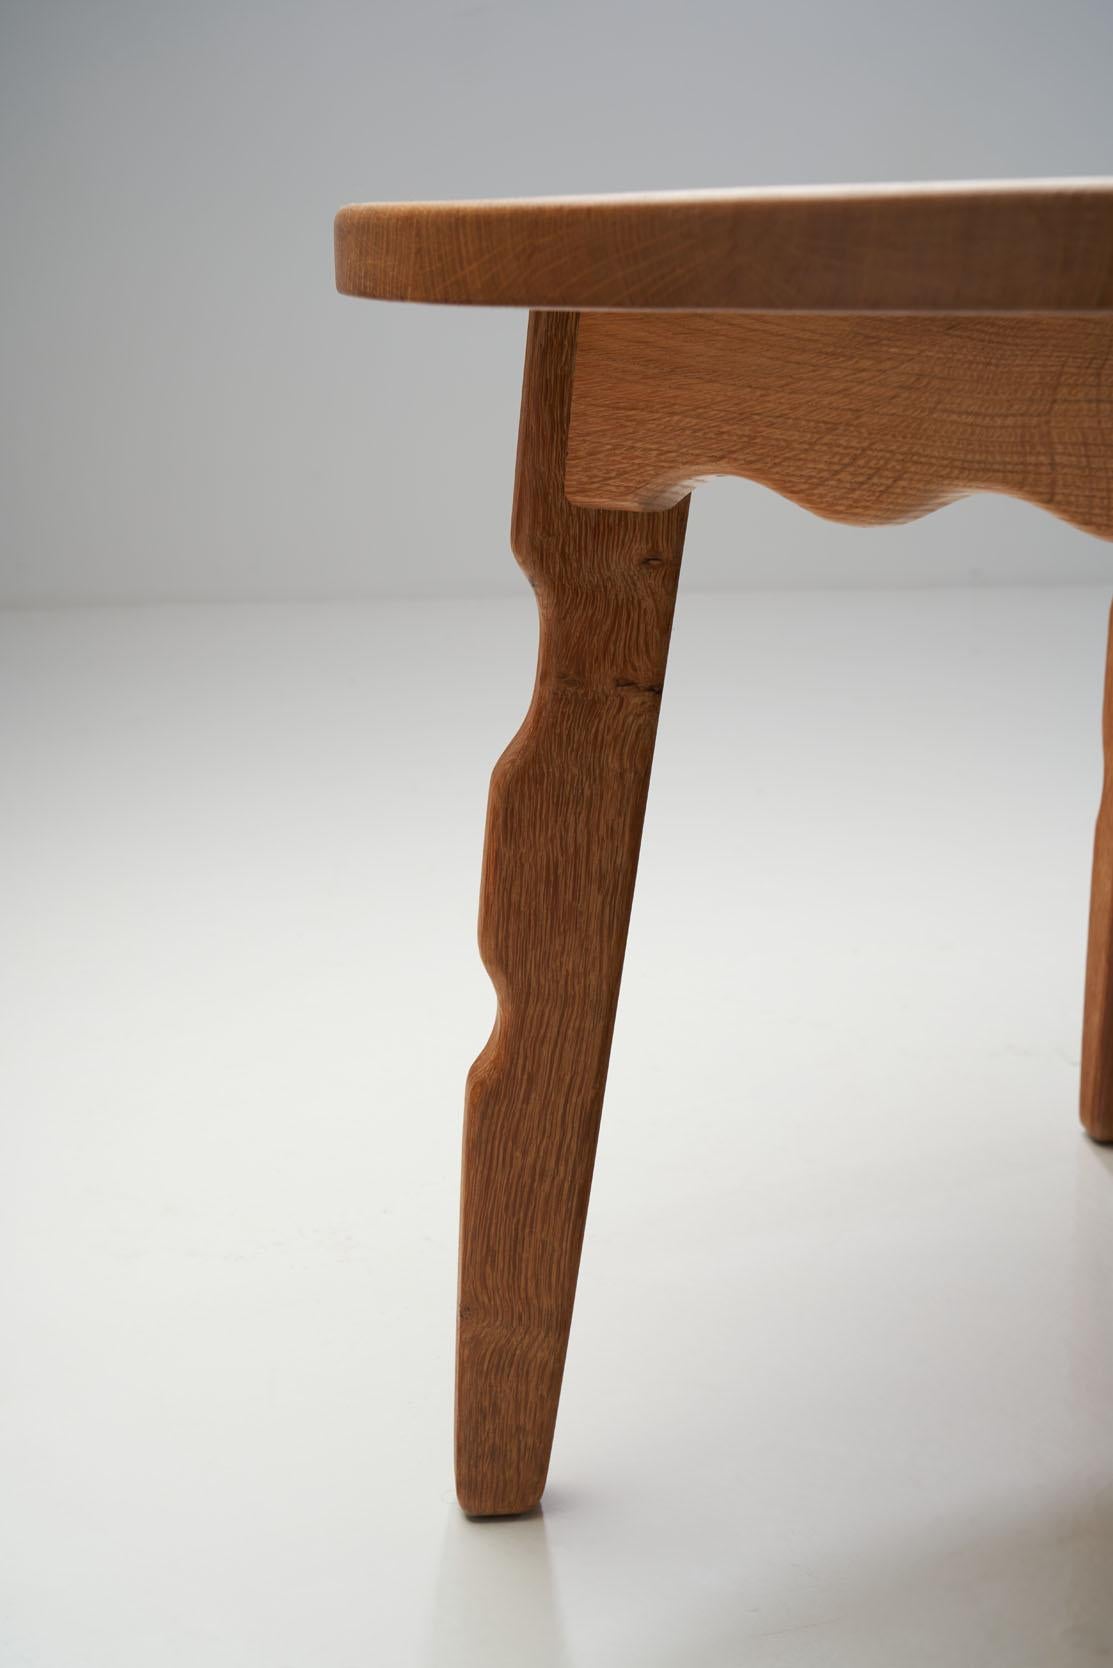 Solid Oak Coffee Table with Sculptural Legs, Denmark, ca 1950s For Sale 8